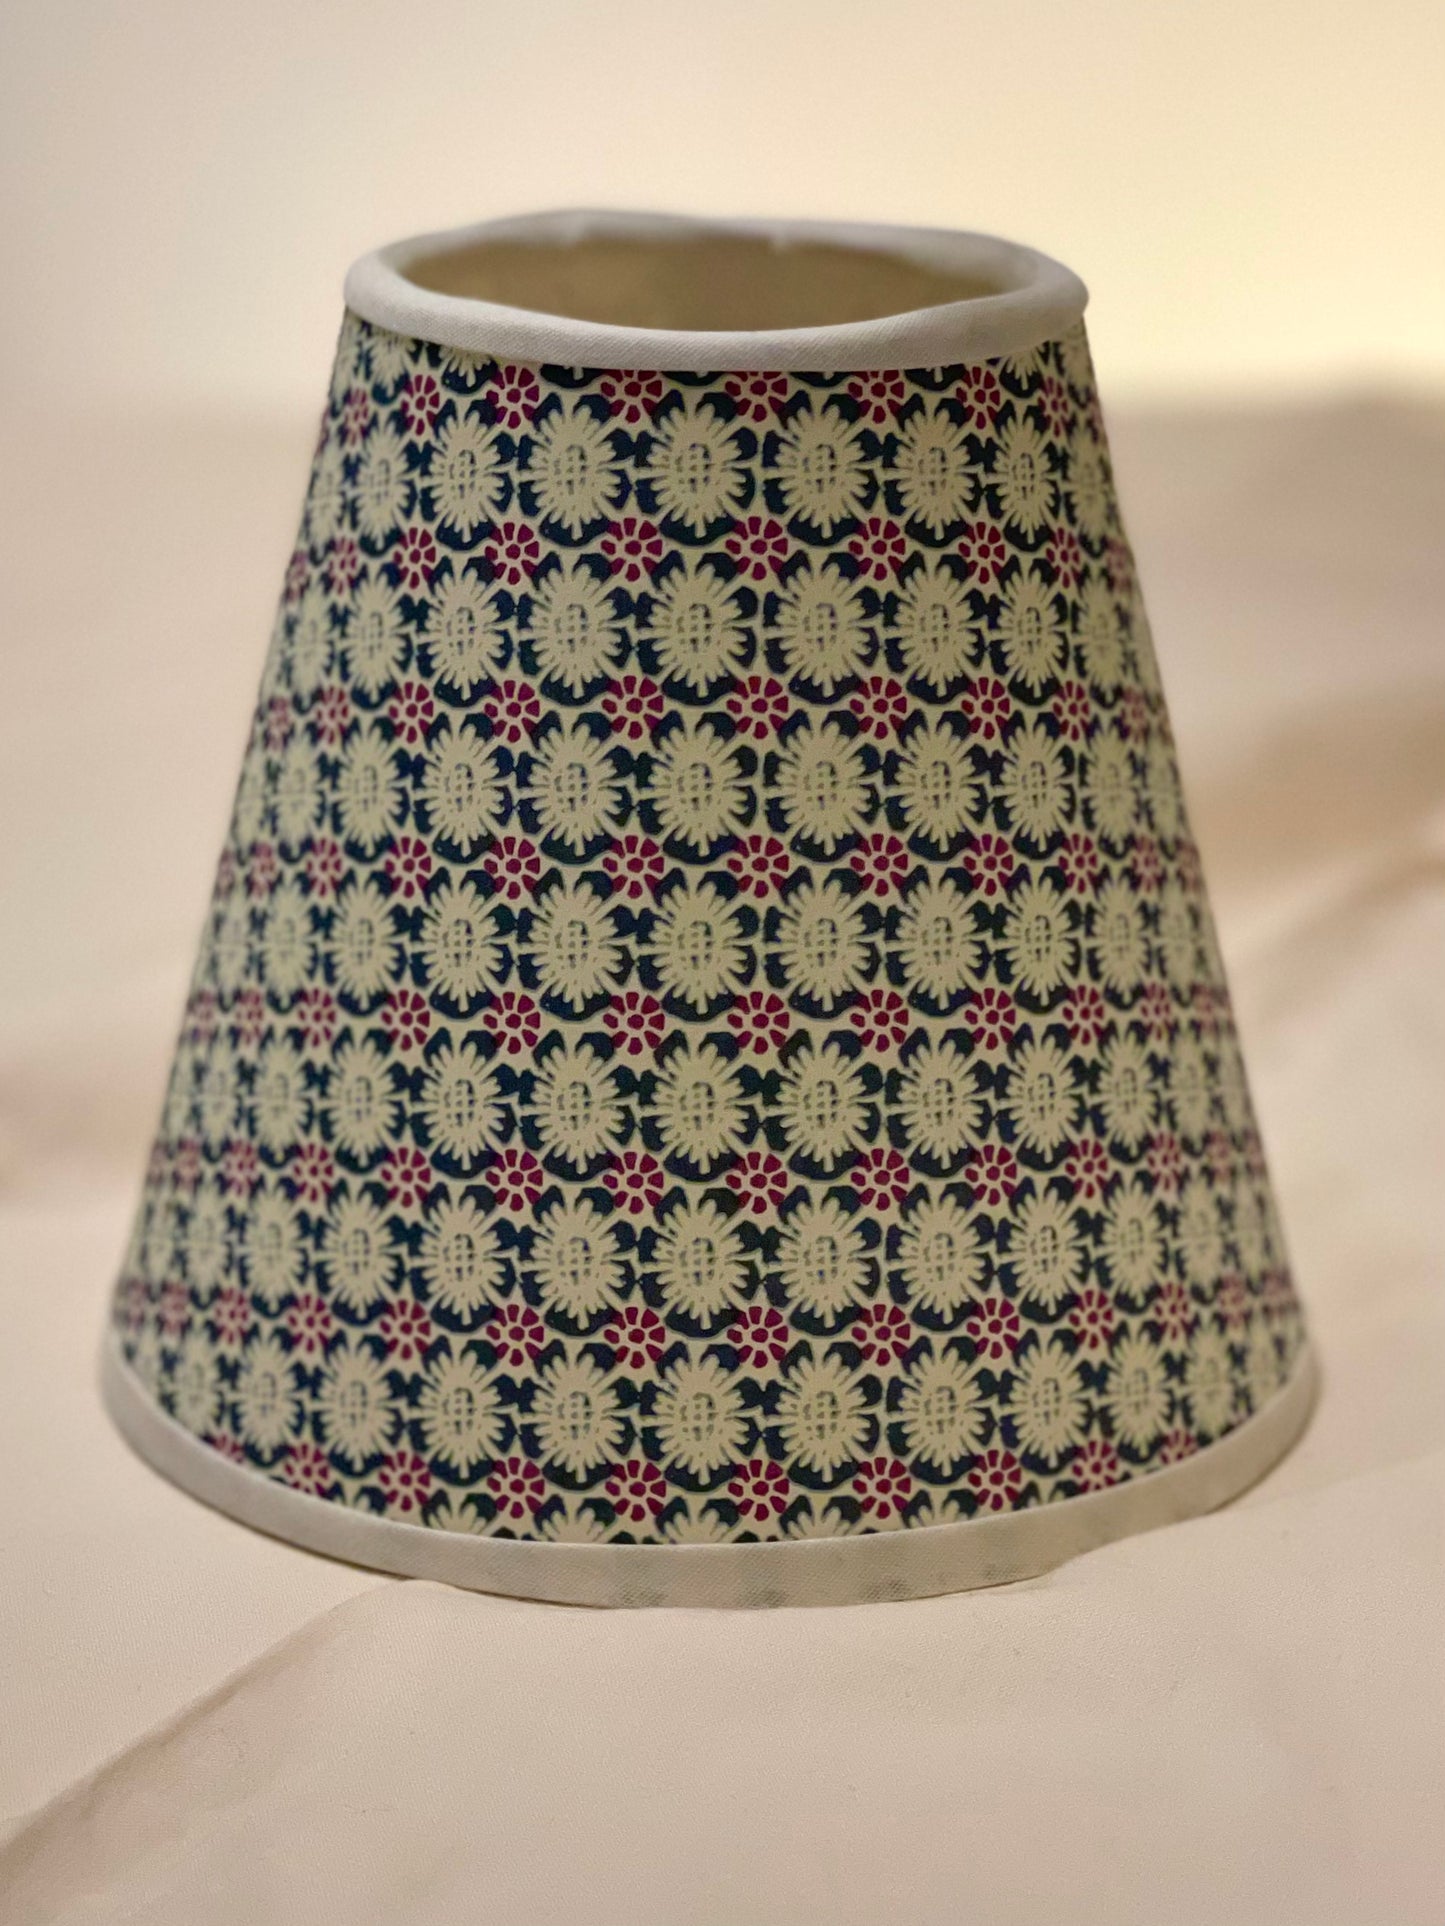 Small Clip-On Lampshade. Patterned Paper from Italy. Purple,Teal, and Palest Blue Medallion. White Trim.